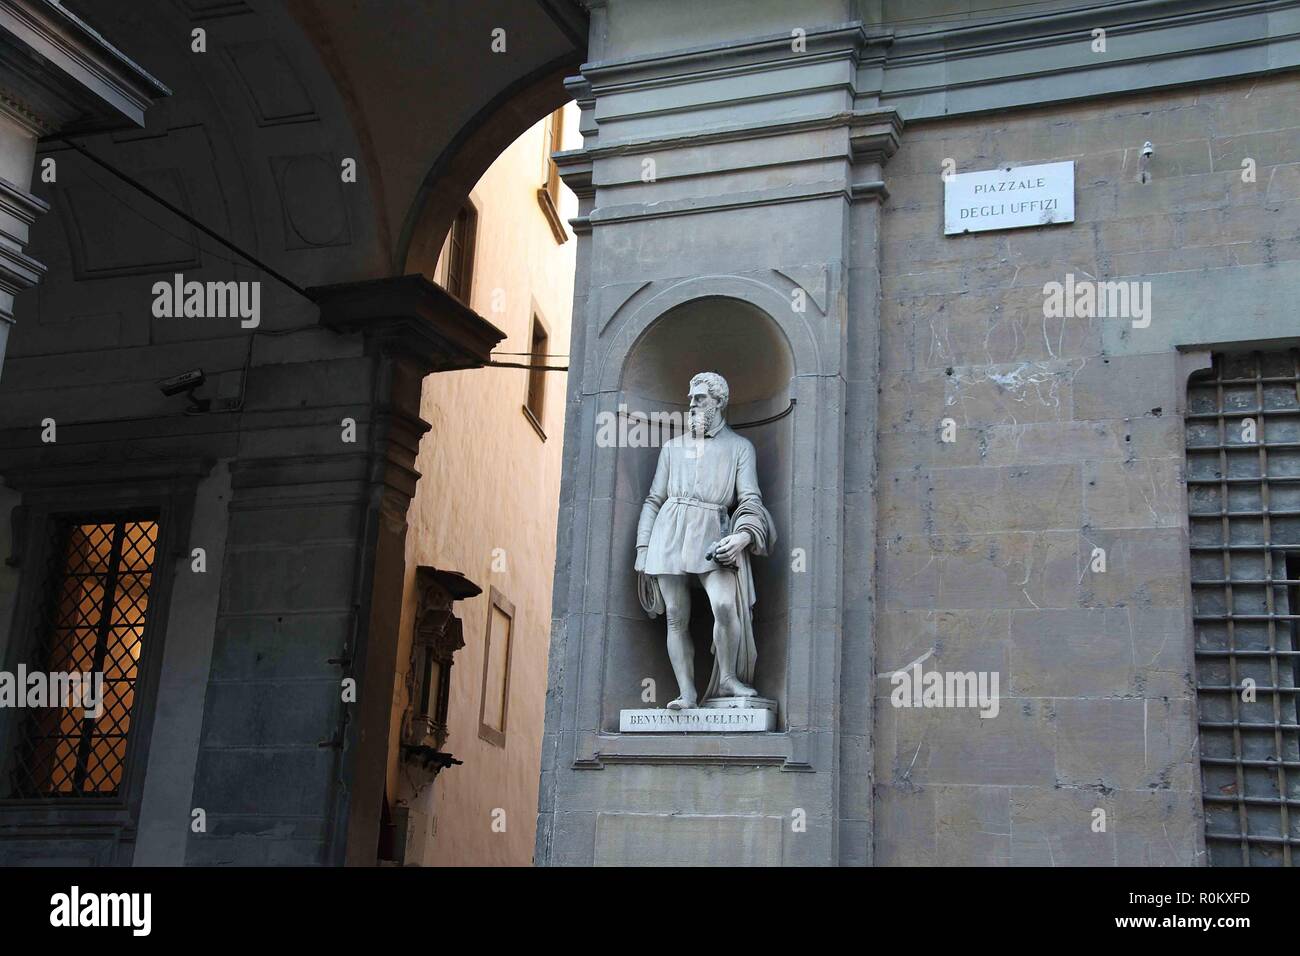 Piazzale degli Uffizi in the historic centre of Florence with the statue of Cellini by Ulisse Cambi Stock Photo